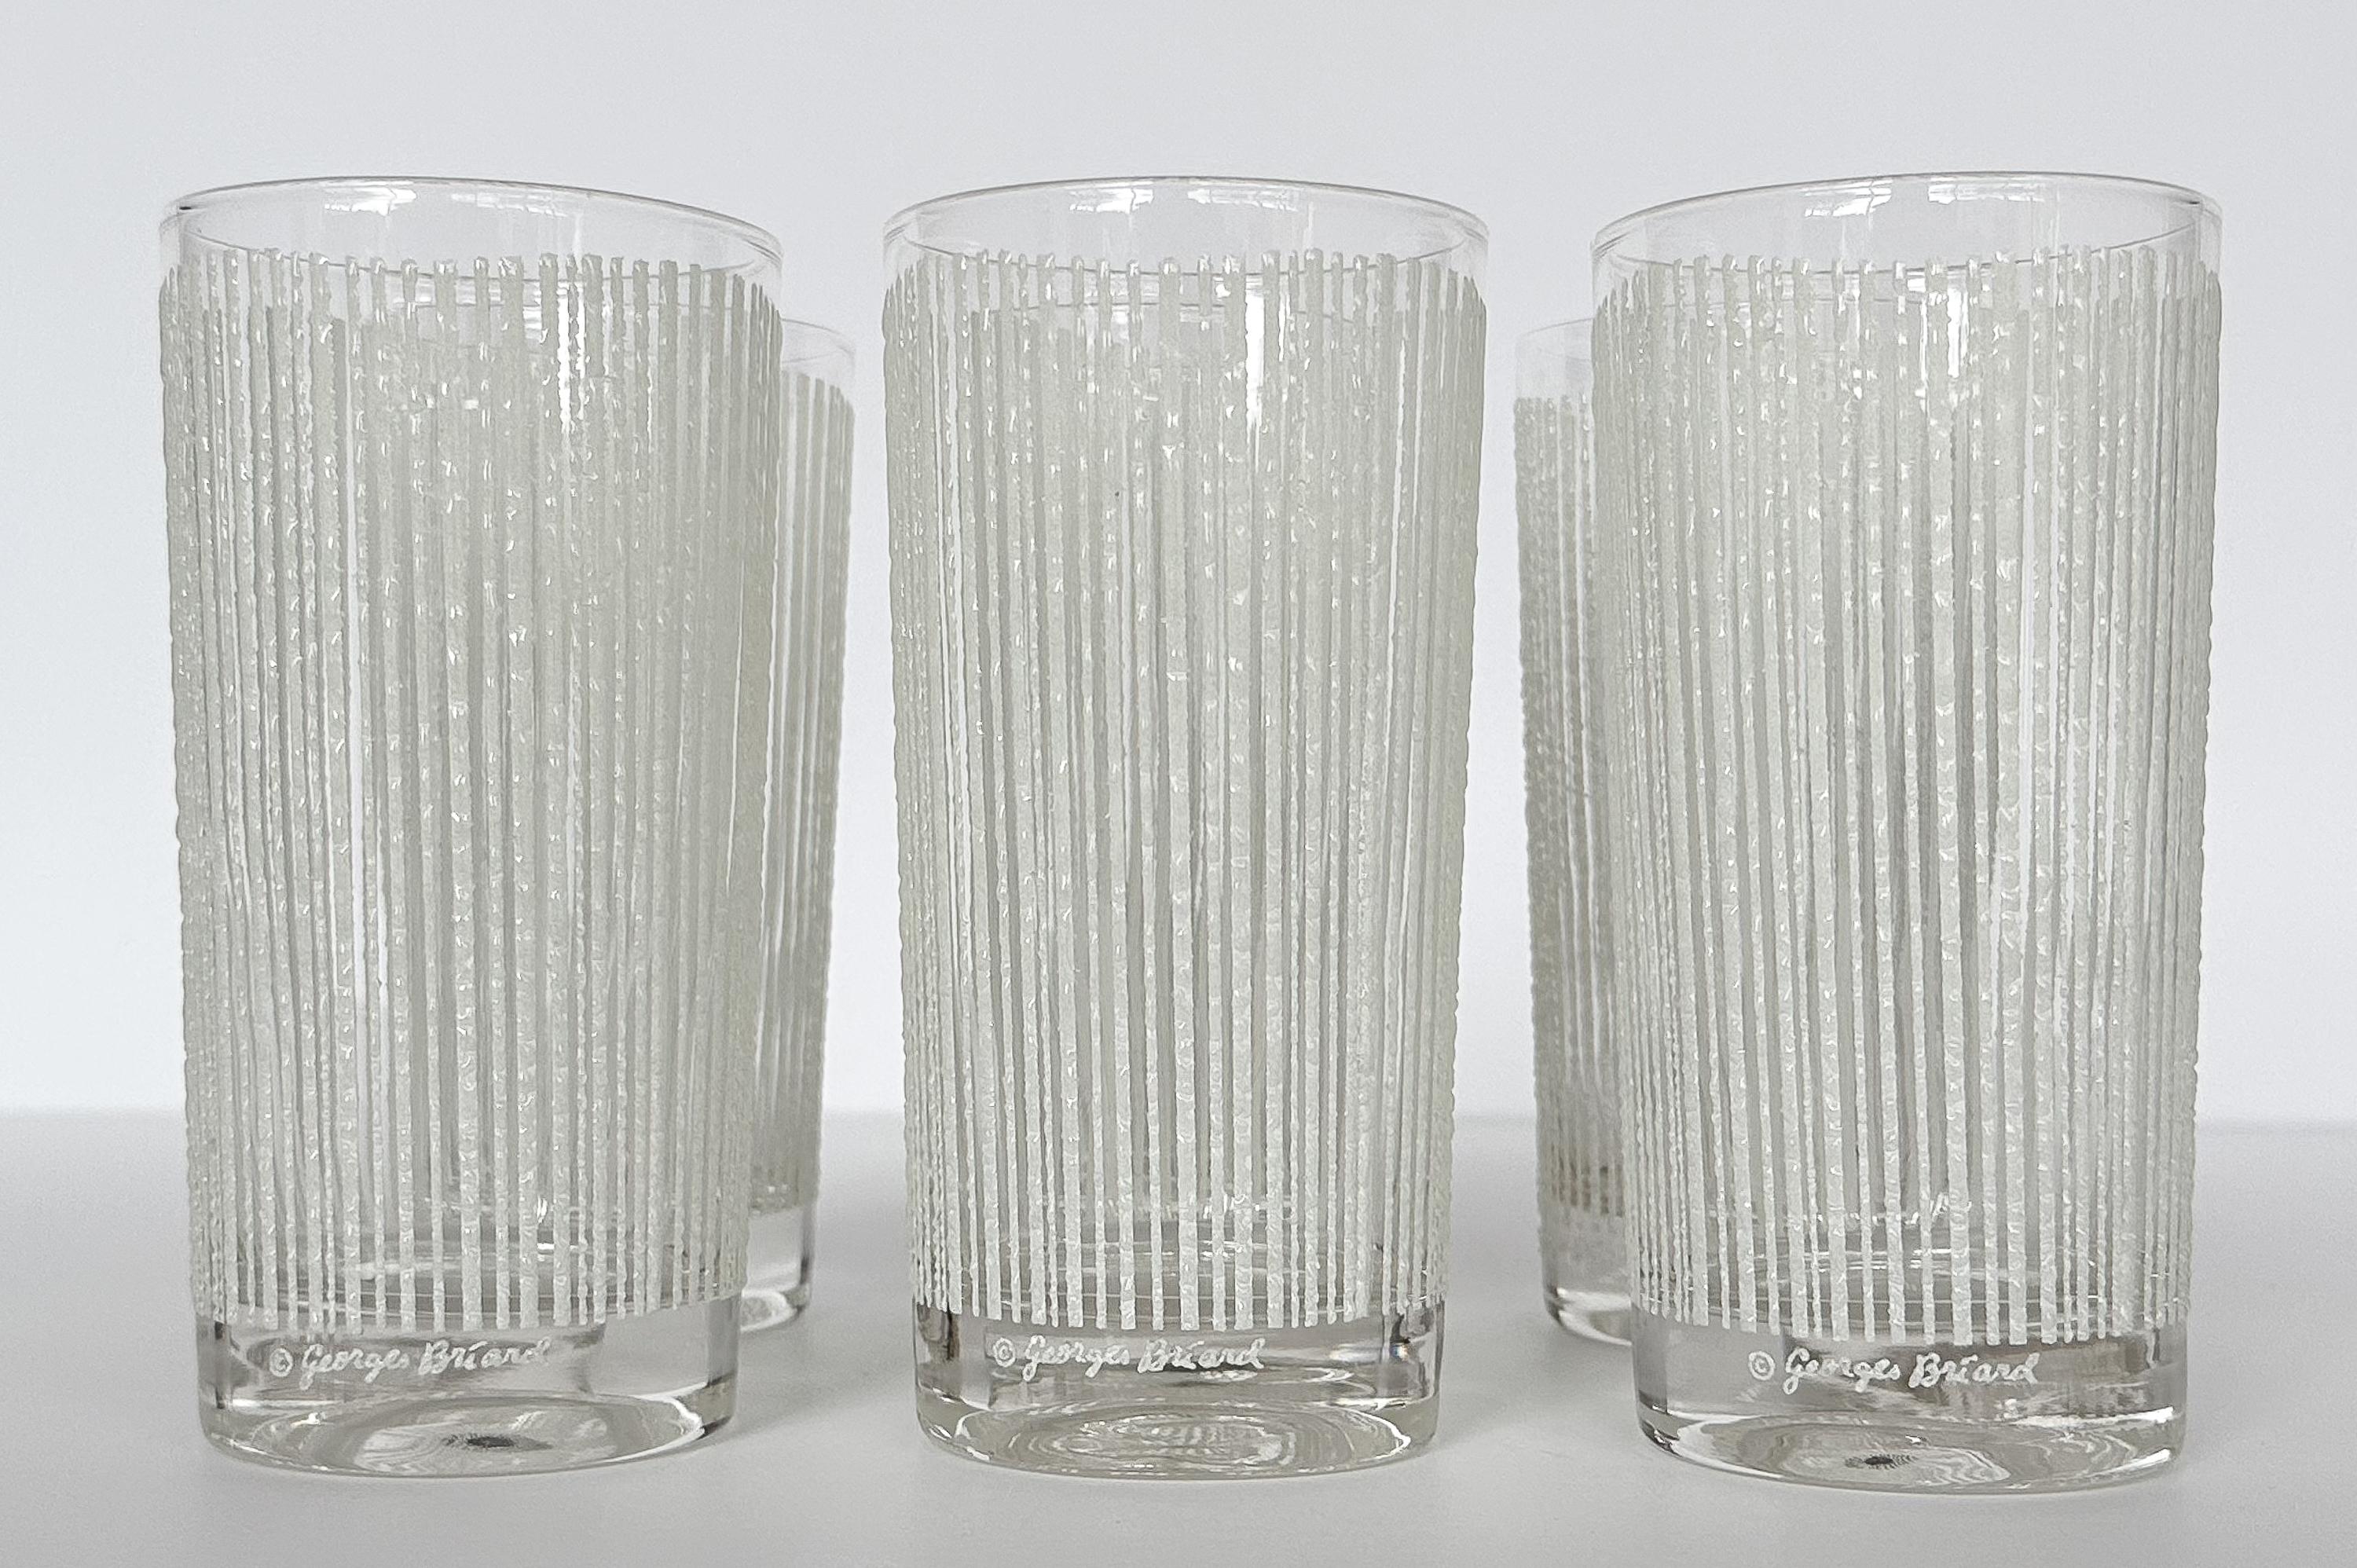 Discover the epitome of cocktail sophistication with this set of six mid-century modern Georges Briard “icicle” pattern highball glasses in white. The 